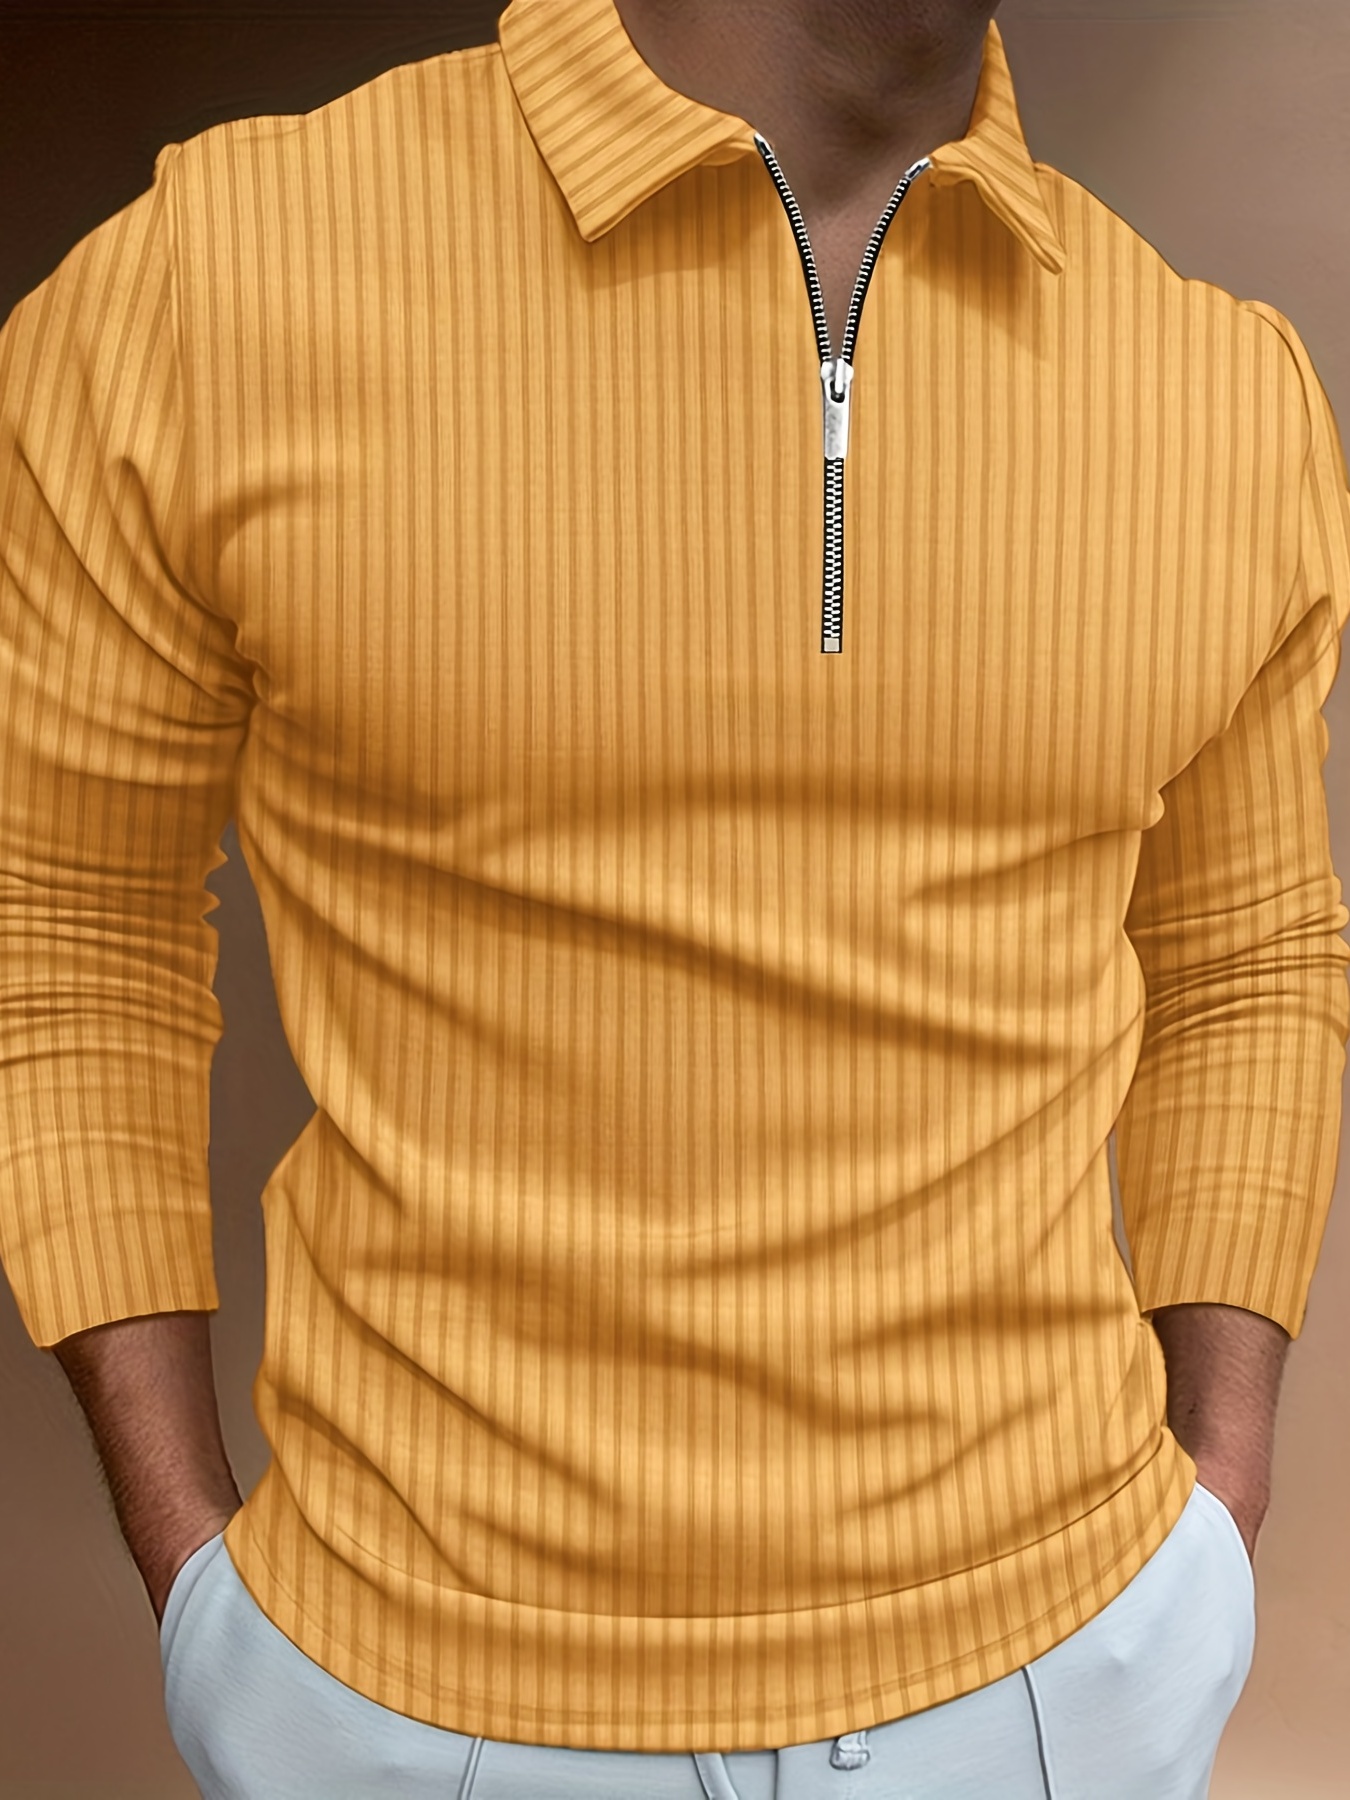 Mustard Dress Pants with White and Black Vertical Striped Shirt Outfits For  Men (3 ideas & outfits)